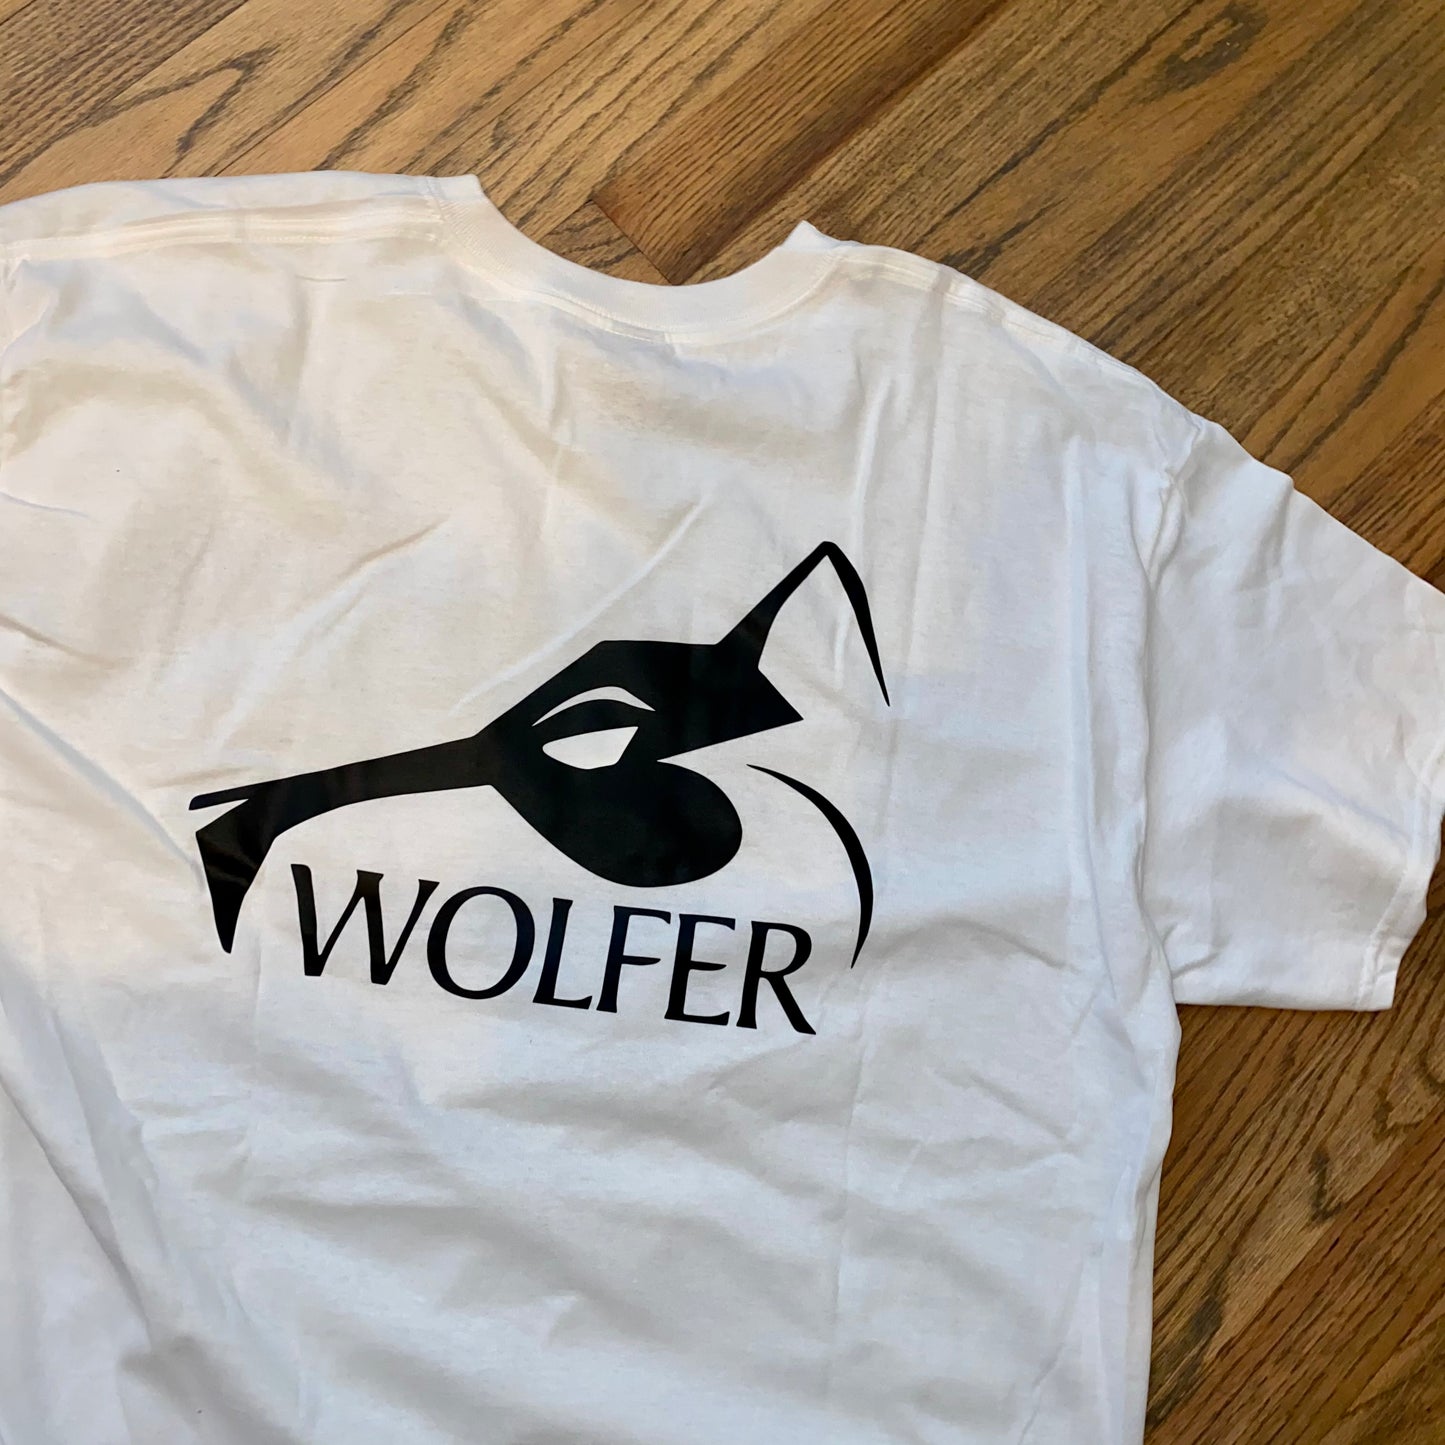 Wolfer by ComTac shirt